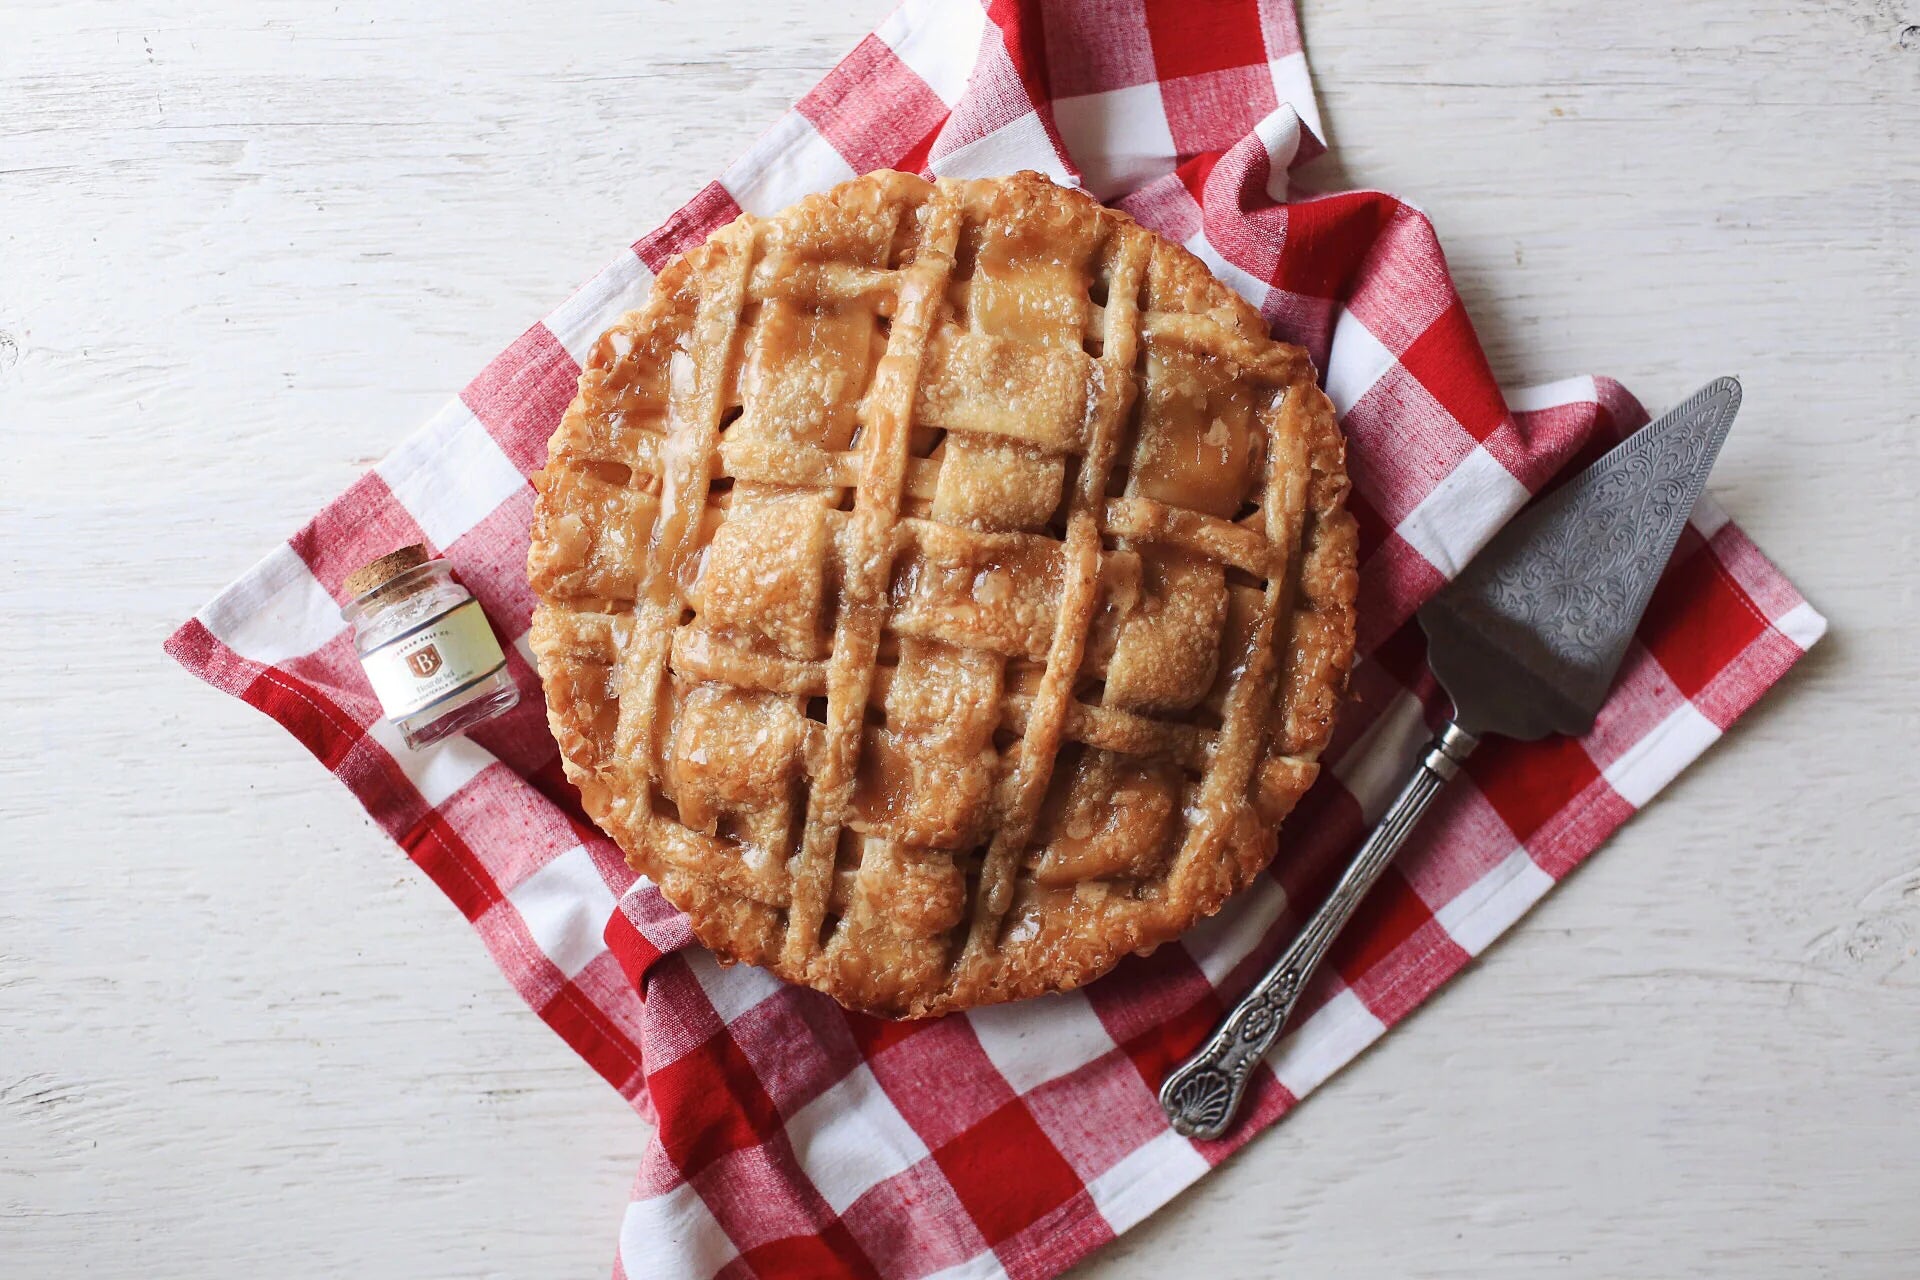 Homemade apple pie with fleur de sel, red and white checker towel in background